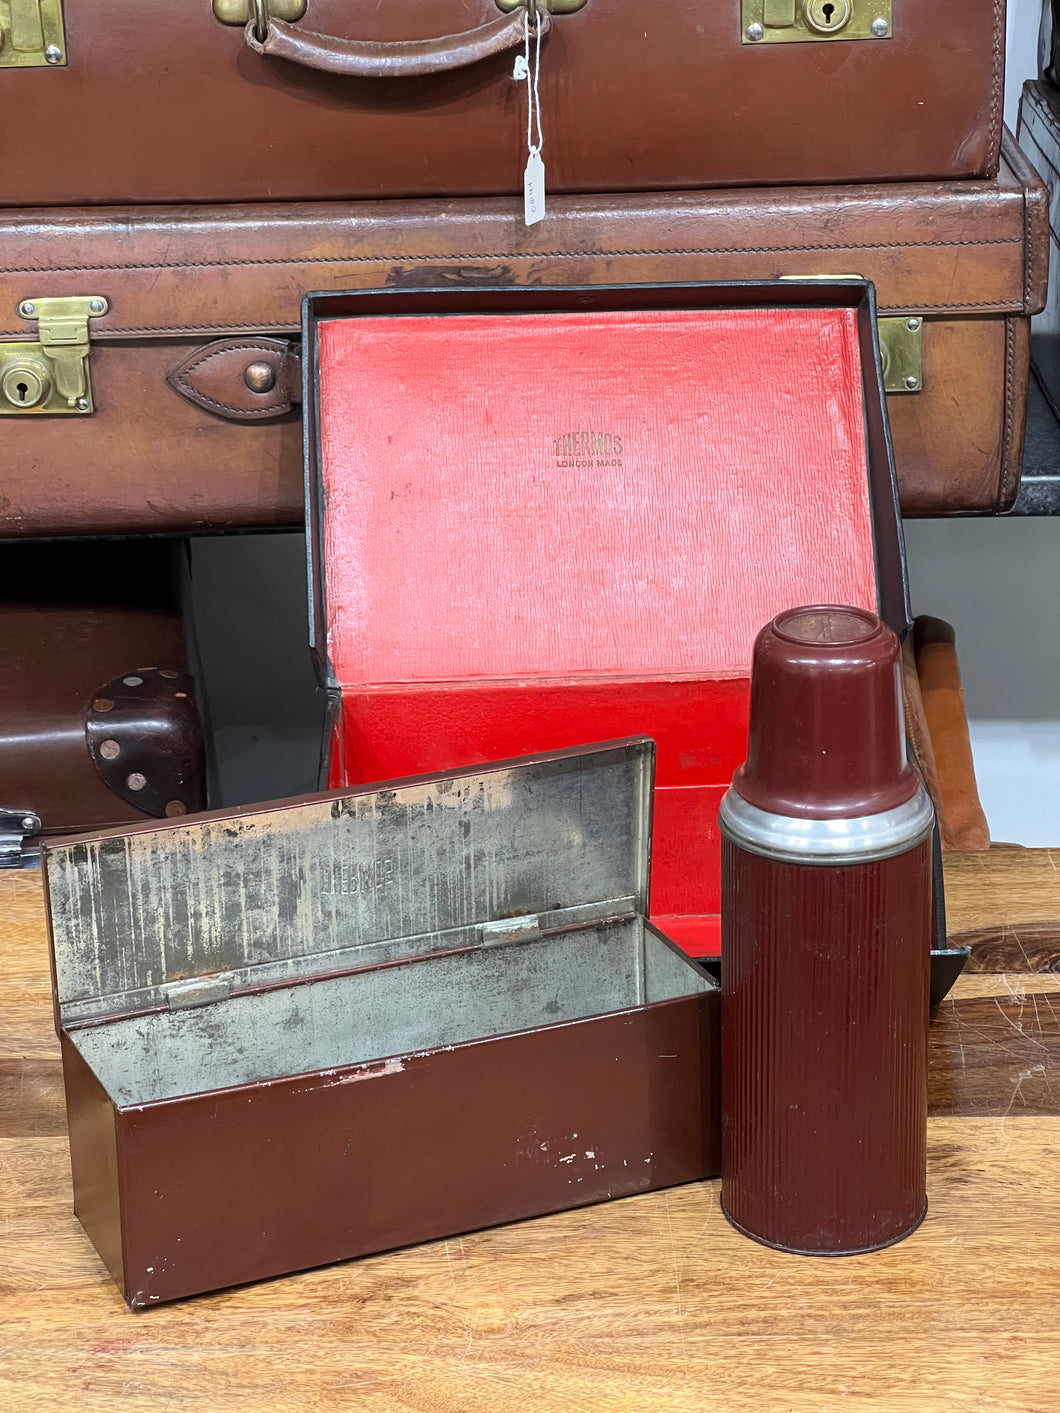 Rare Unusual Vintage Antique Thermos Lunchbox & Flask Picnic Set